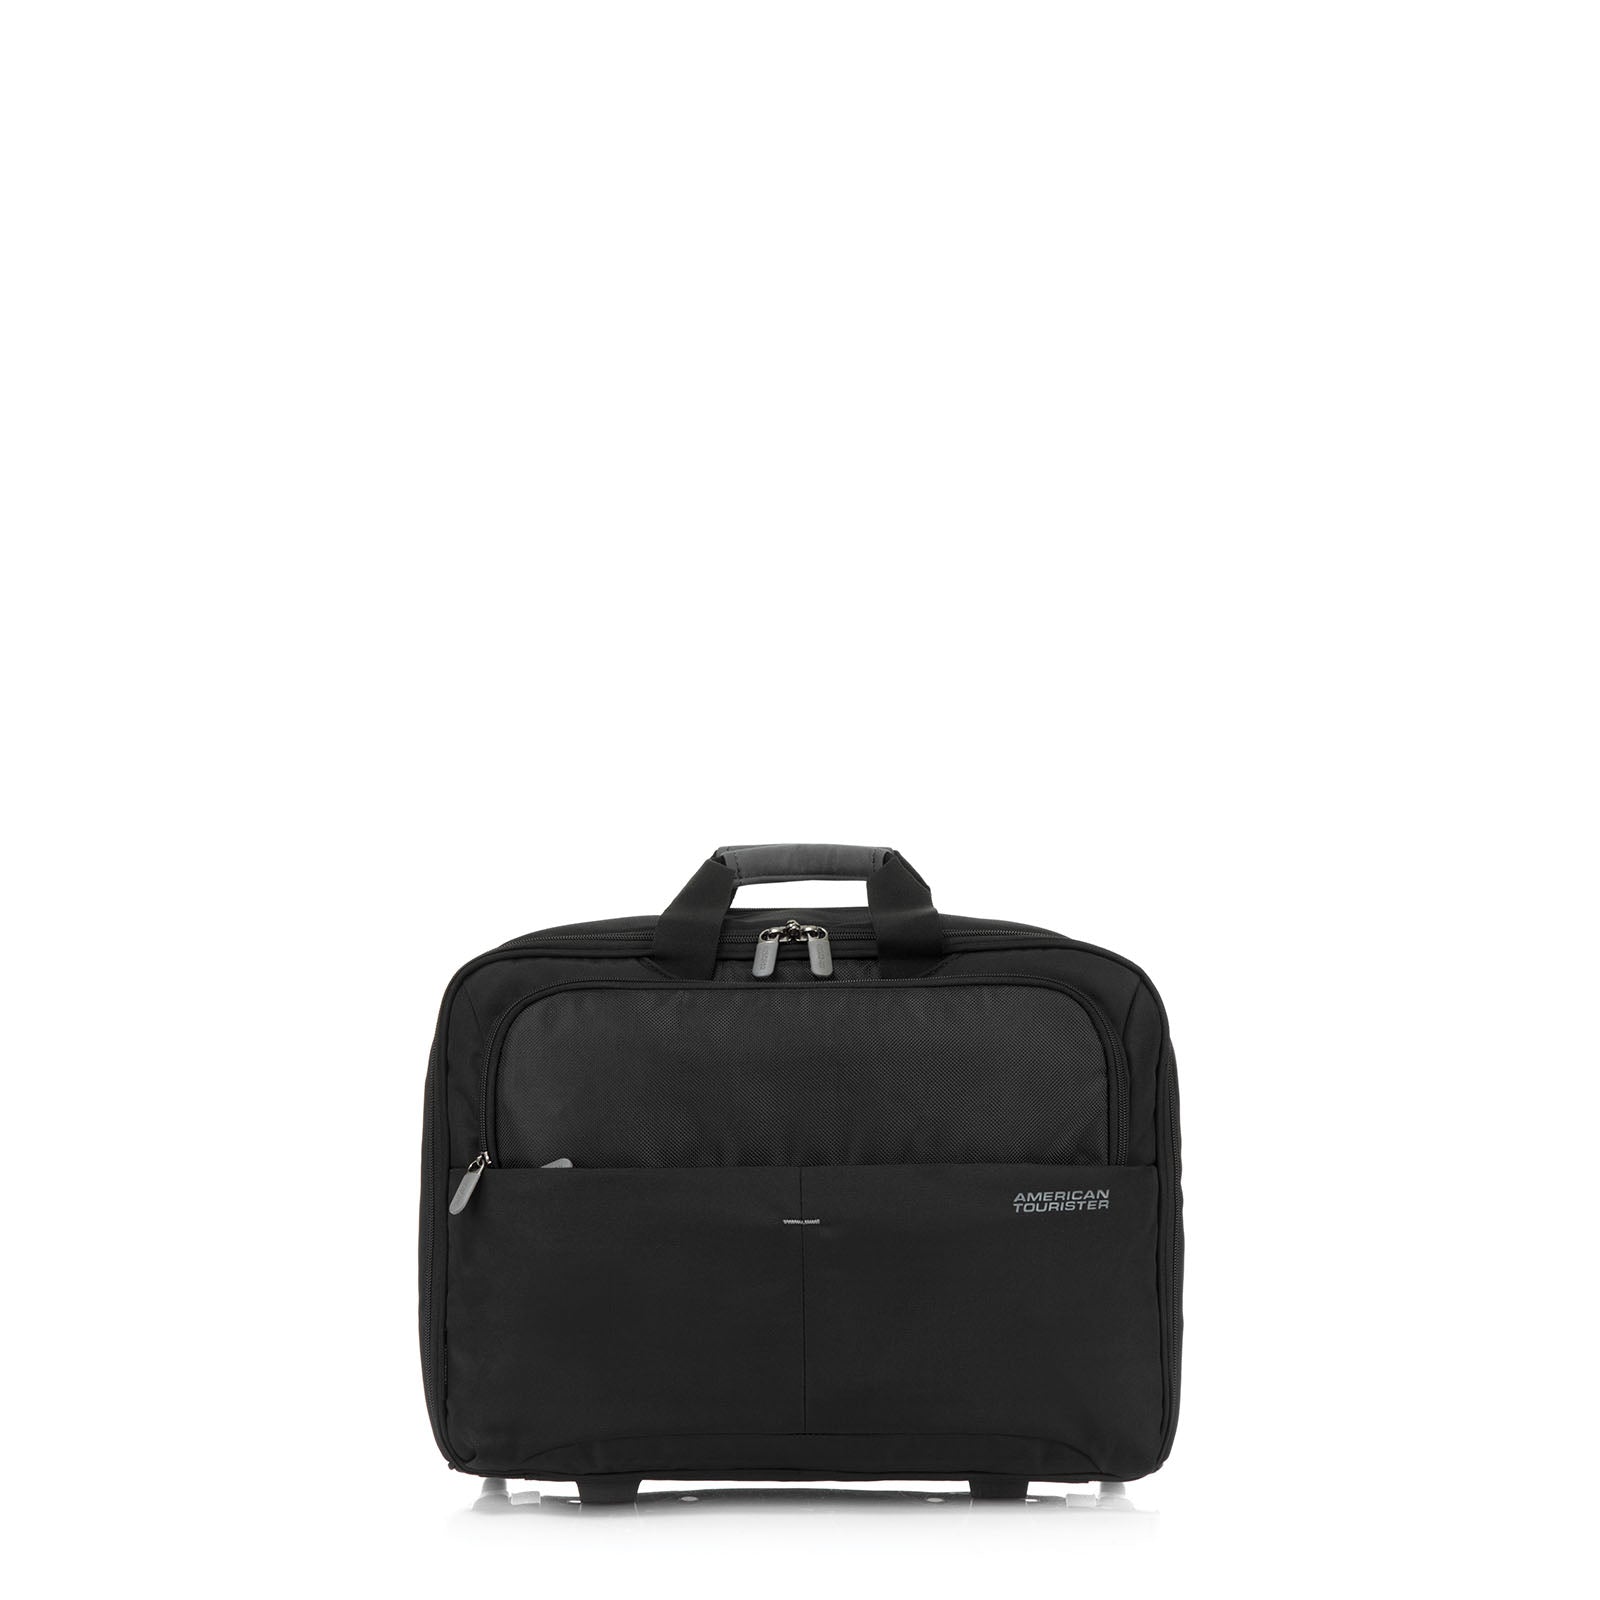 American-Tourister-Speedair-44cm-Rolling-Tote-Black-Front